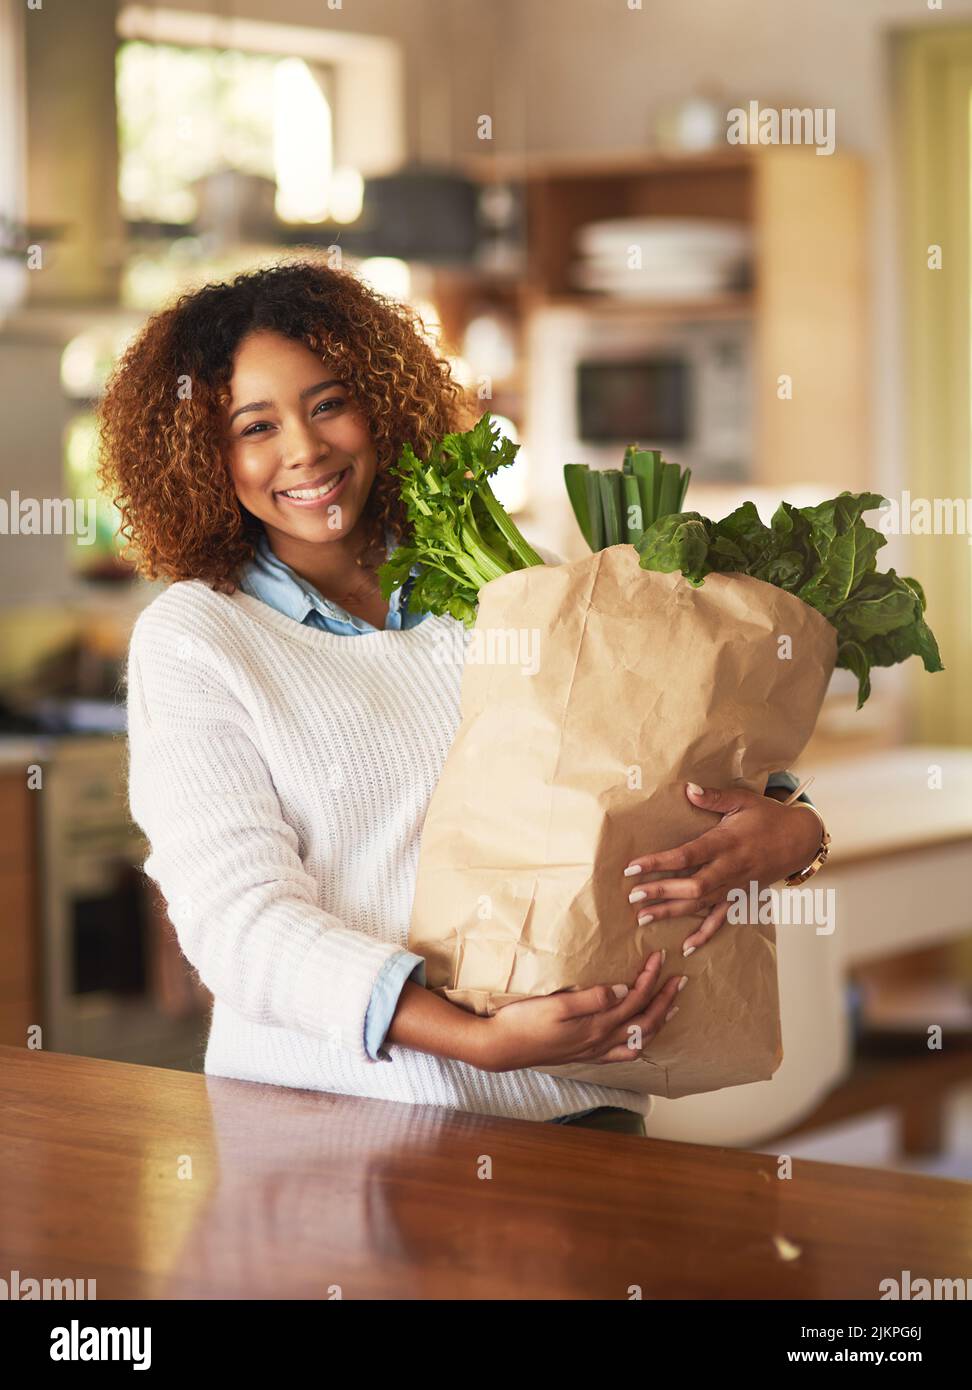 Healthy living begins at home. Portrait of a happy young woman holding a bag full of healthy vegetables at home. Stock Photo